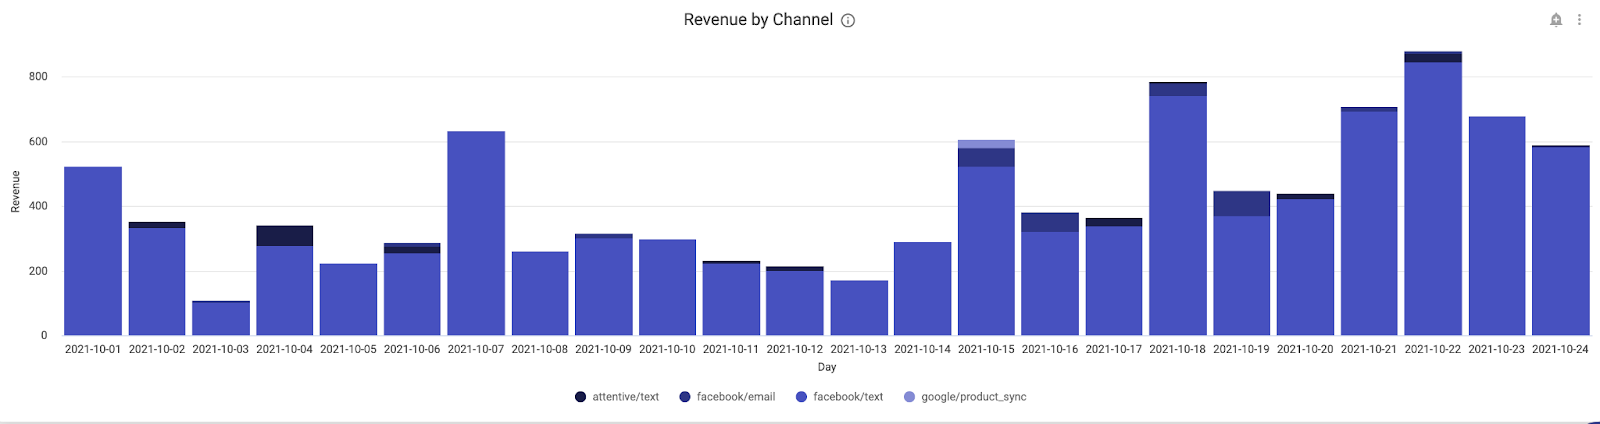 Revenue by channel in enhanced analytics by Recharge.